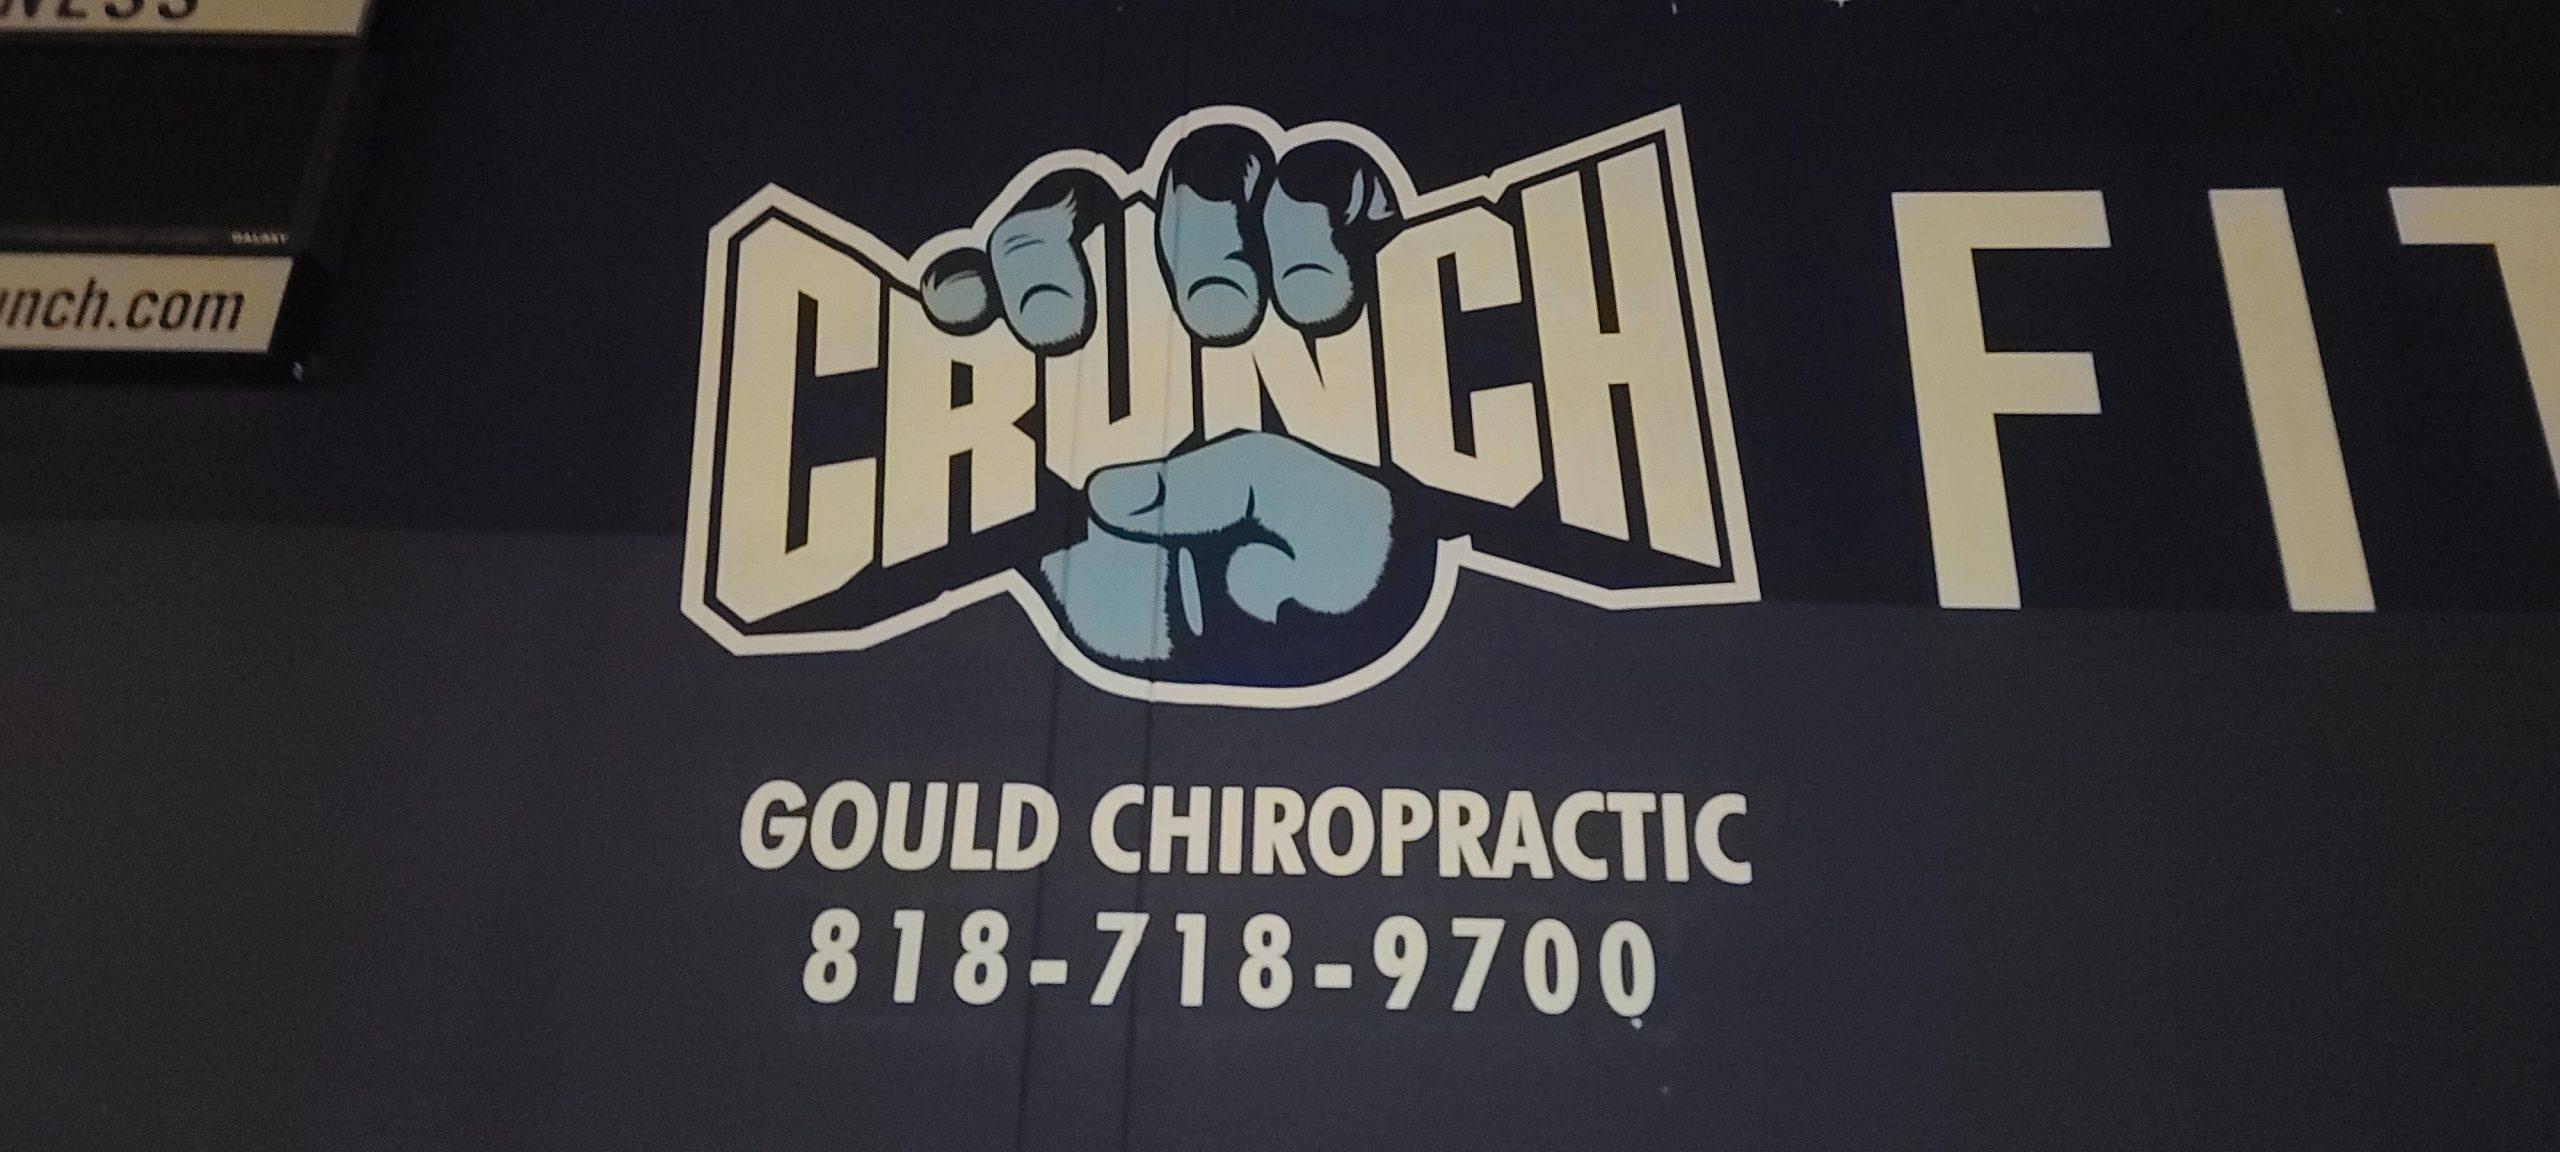 Gym signs encourage clients working on their New Year's resolutions. Like this hand painted sign for Crunch Fitness Chatsworth highlighting chiropractic care.